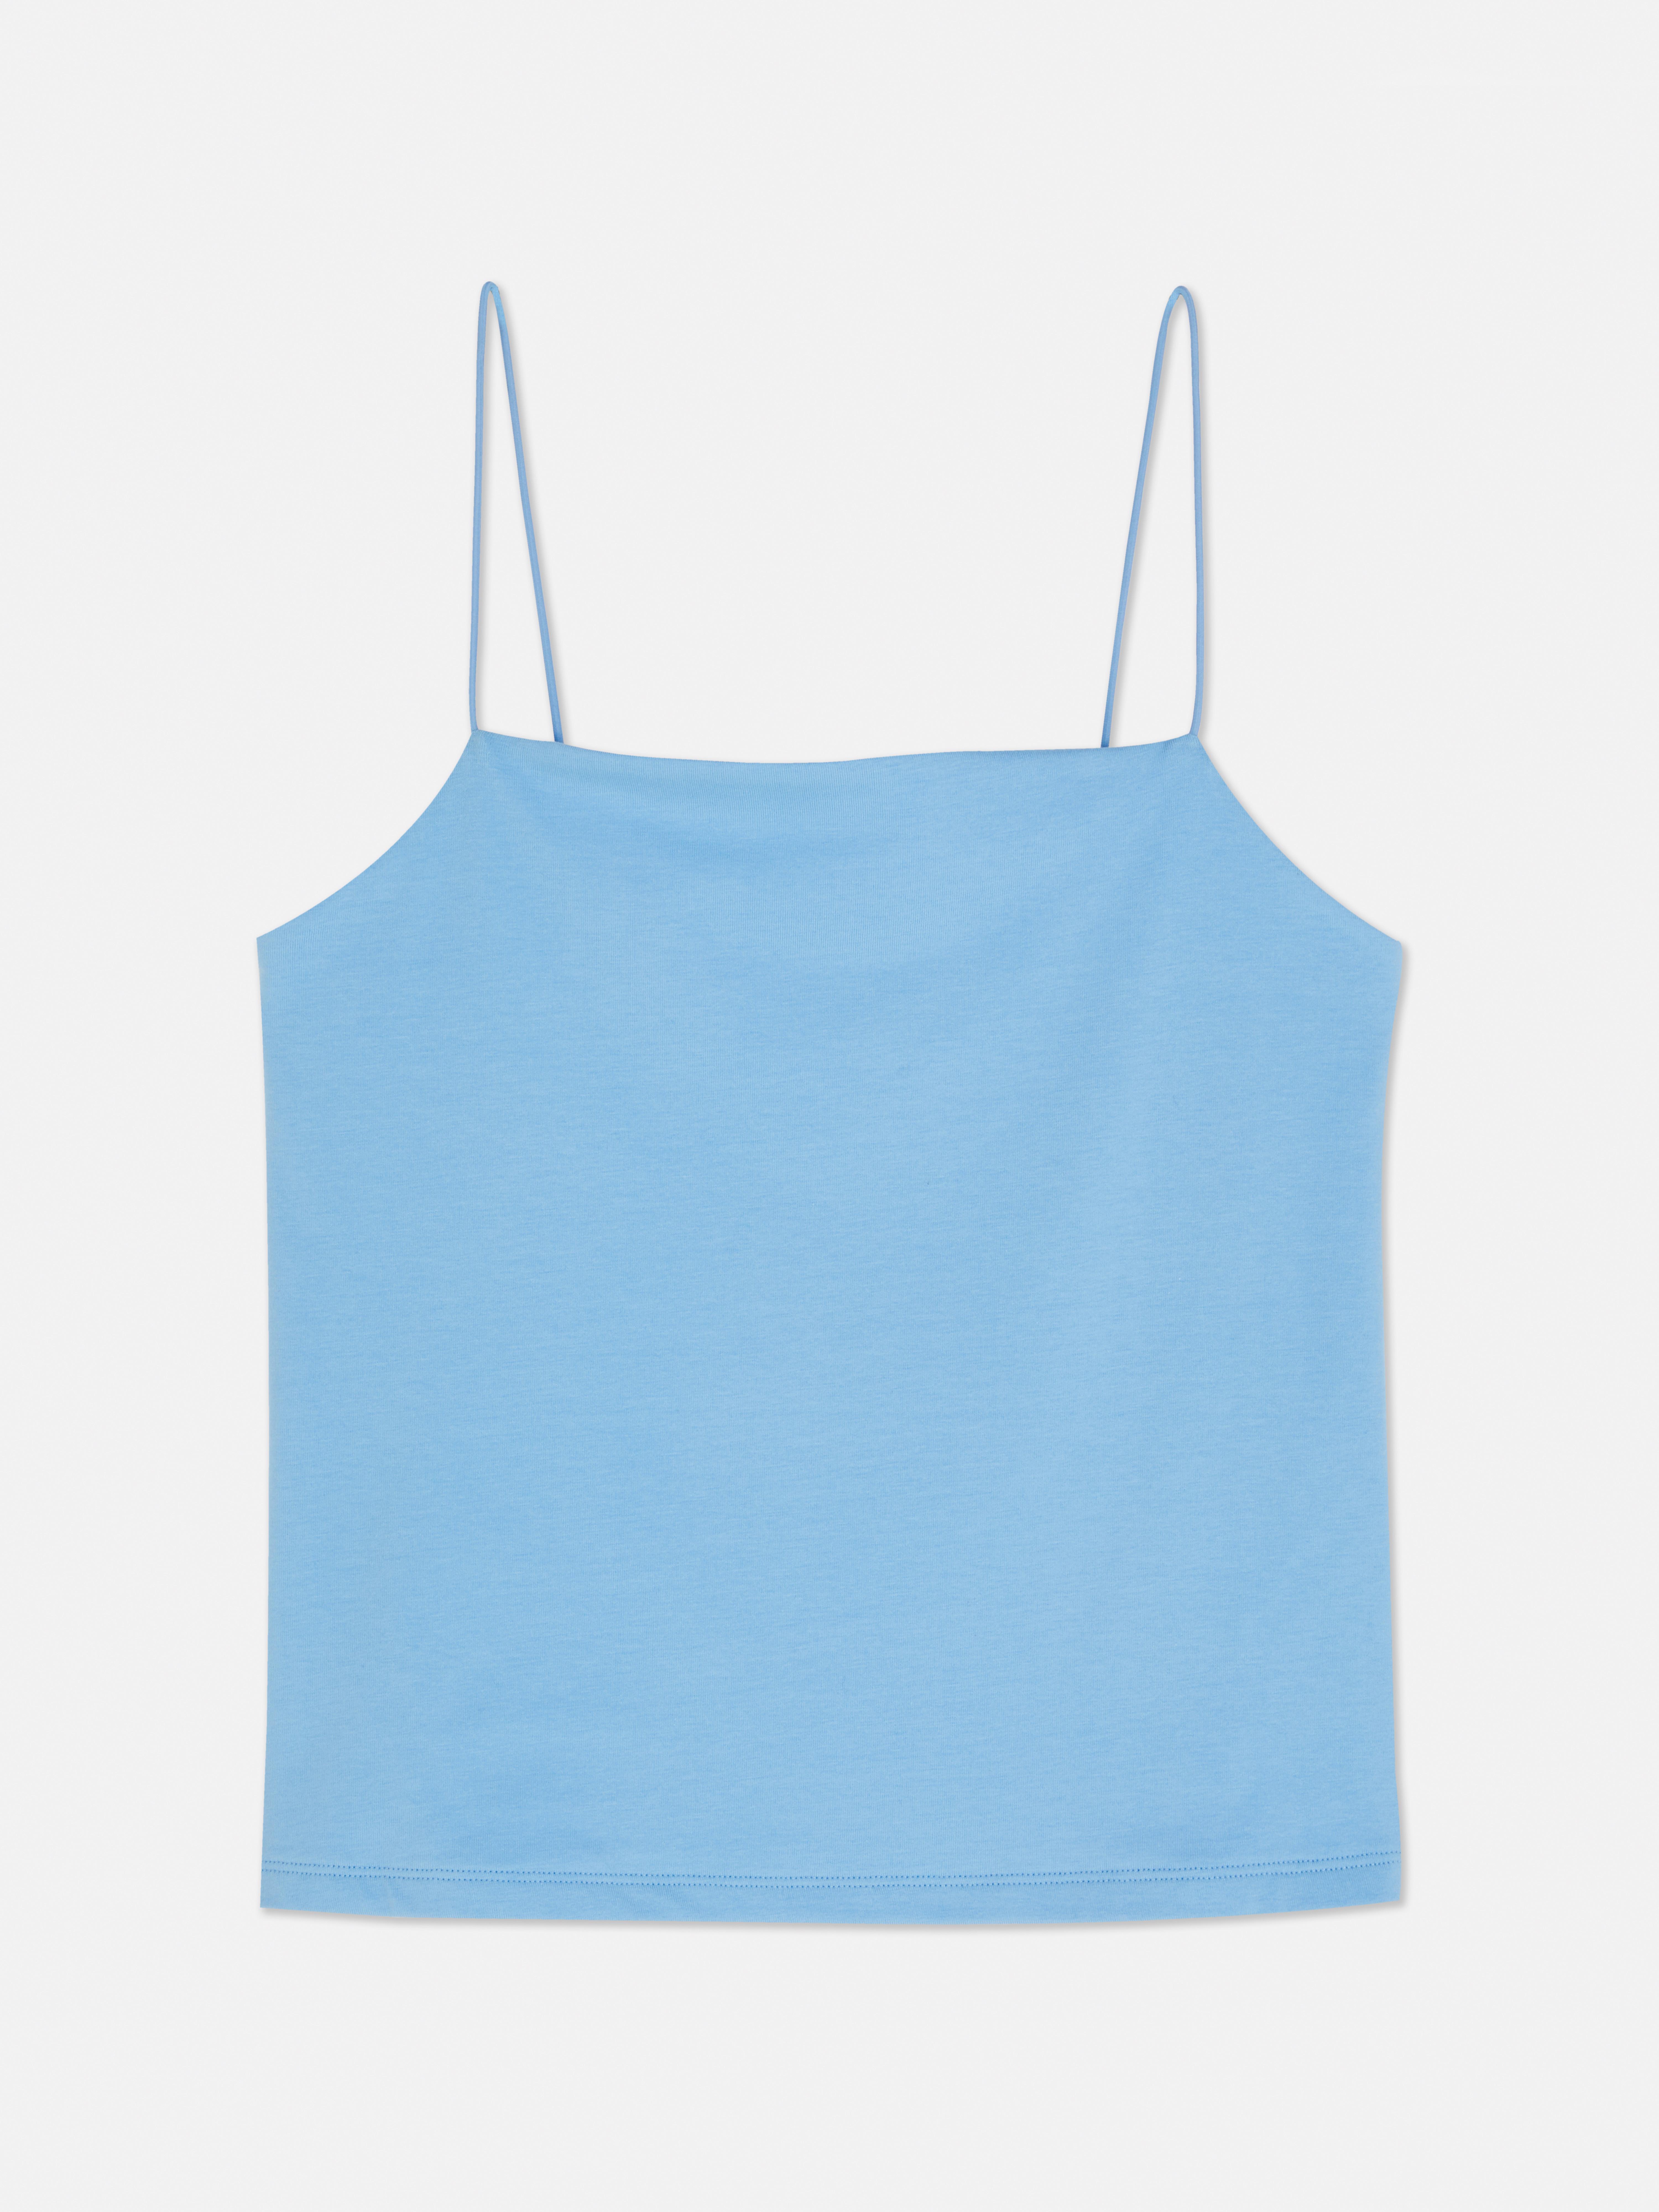 Square Neck Cami Top | Women's Tops | Women's Clothing | Our Women's ...